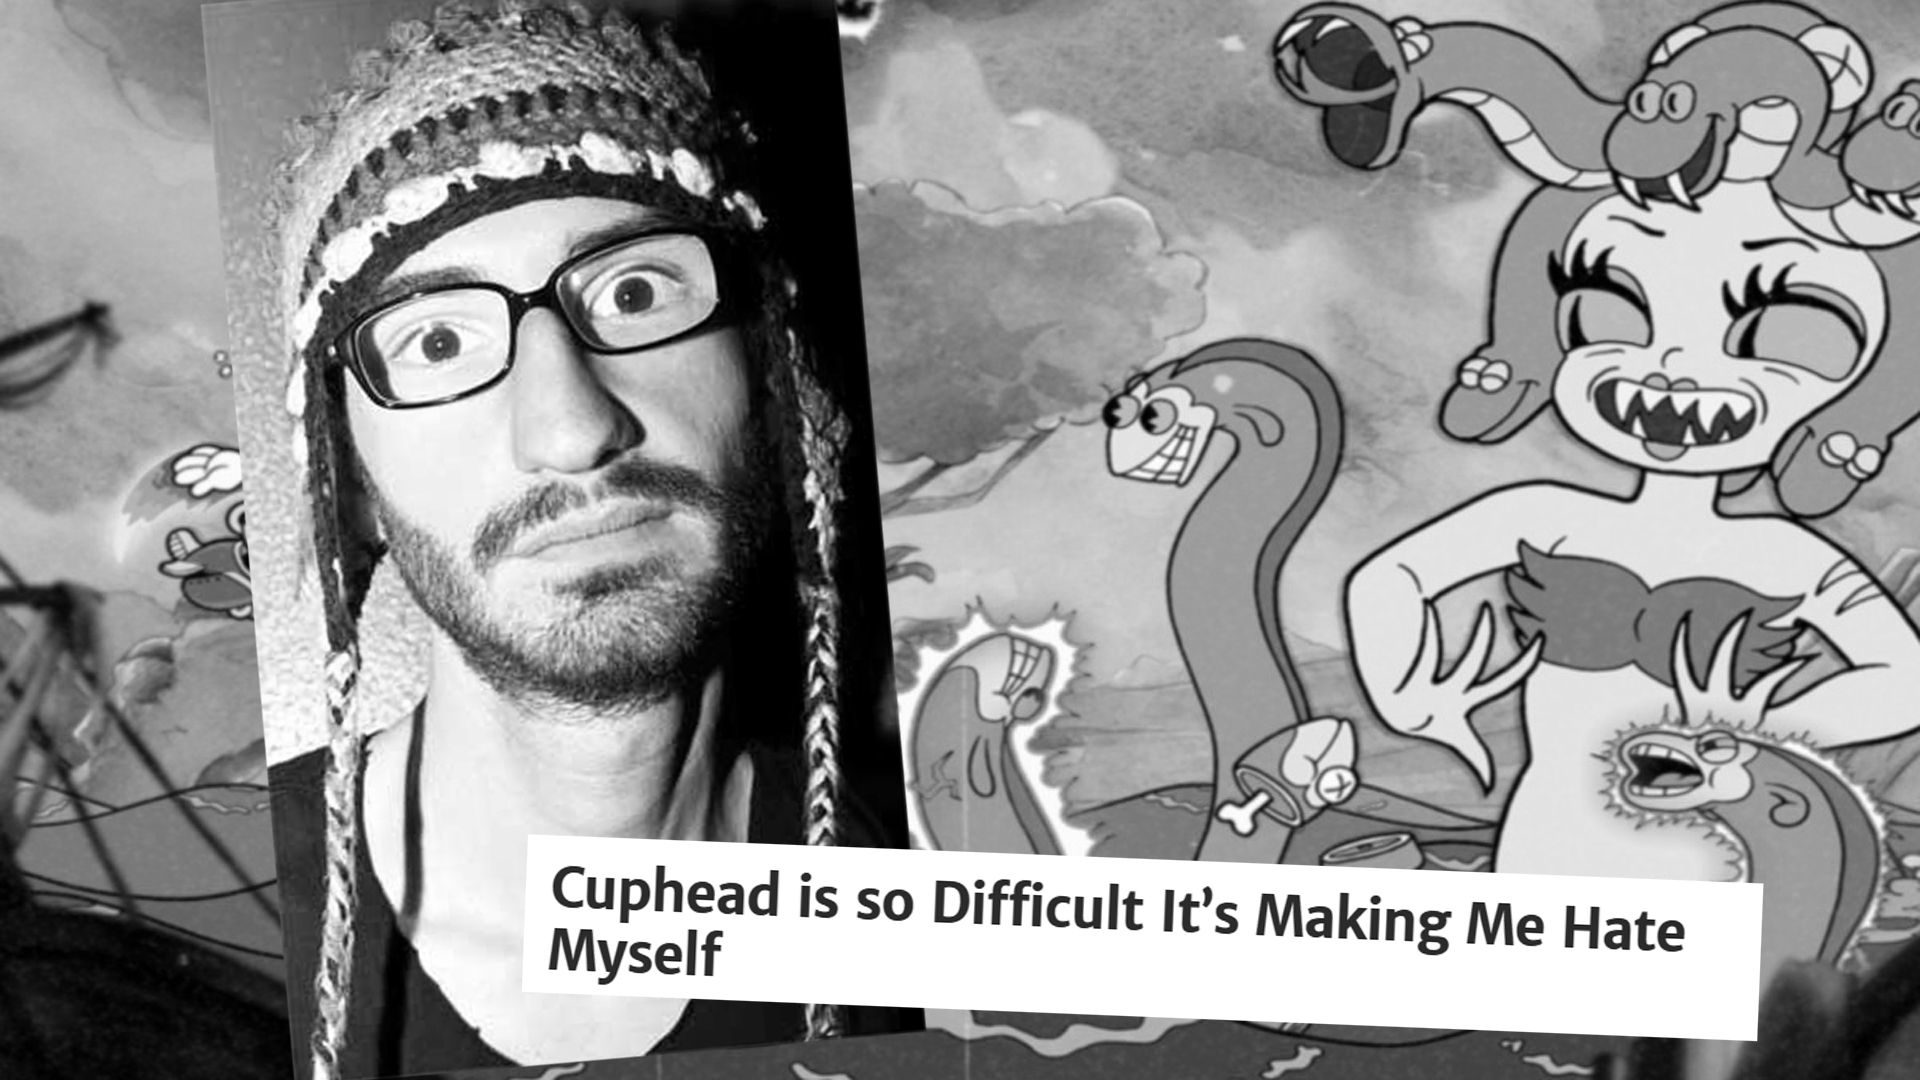 Video Game Journalist, 28, Takes Life After Playing Cuphead